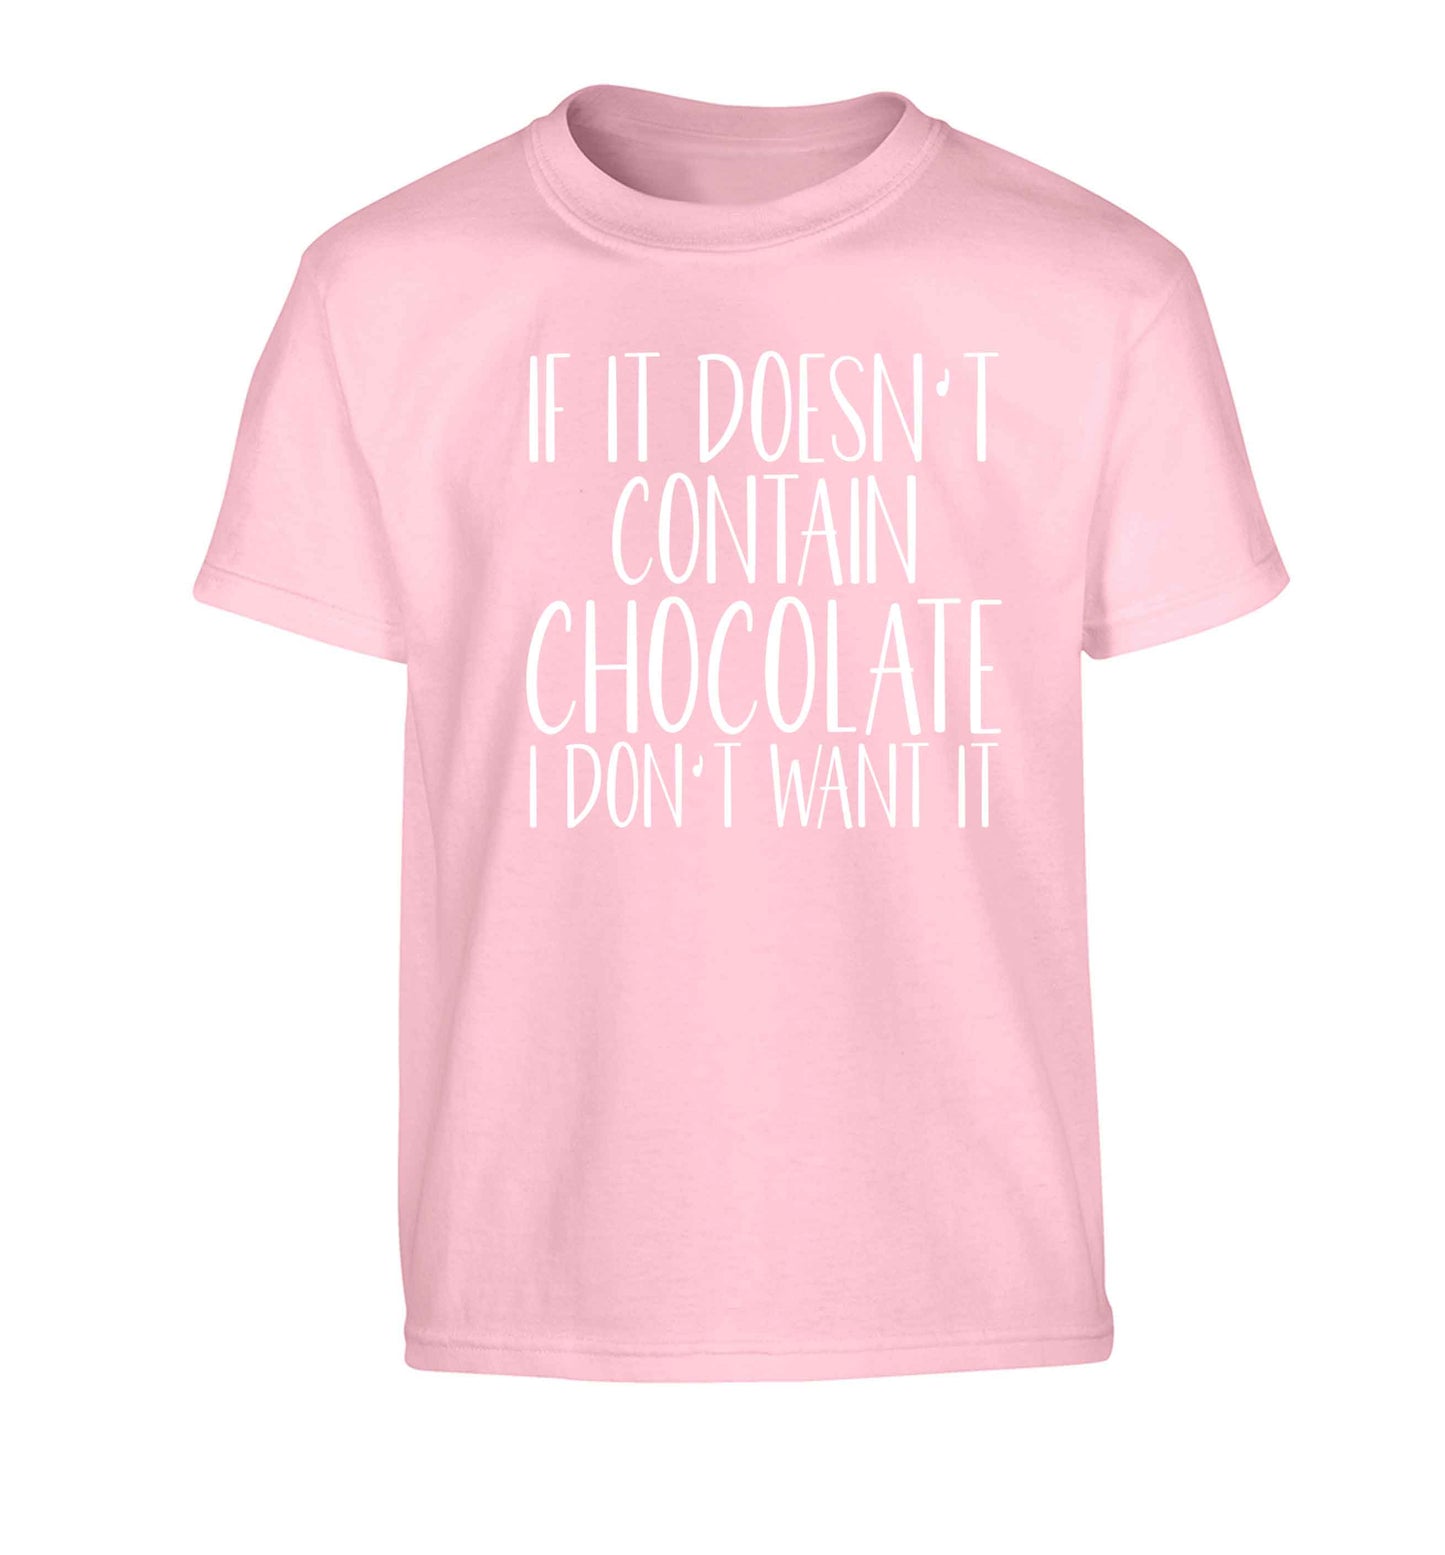 If it doesn't contain chocolate I don't want it Children's light pink Tshirt 12-13 Years